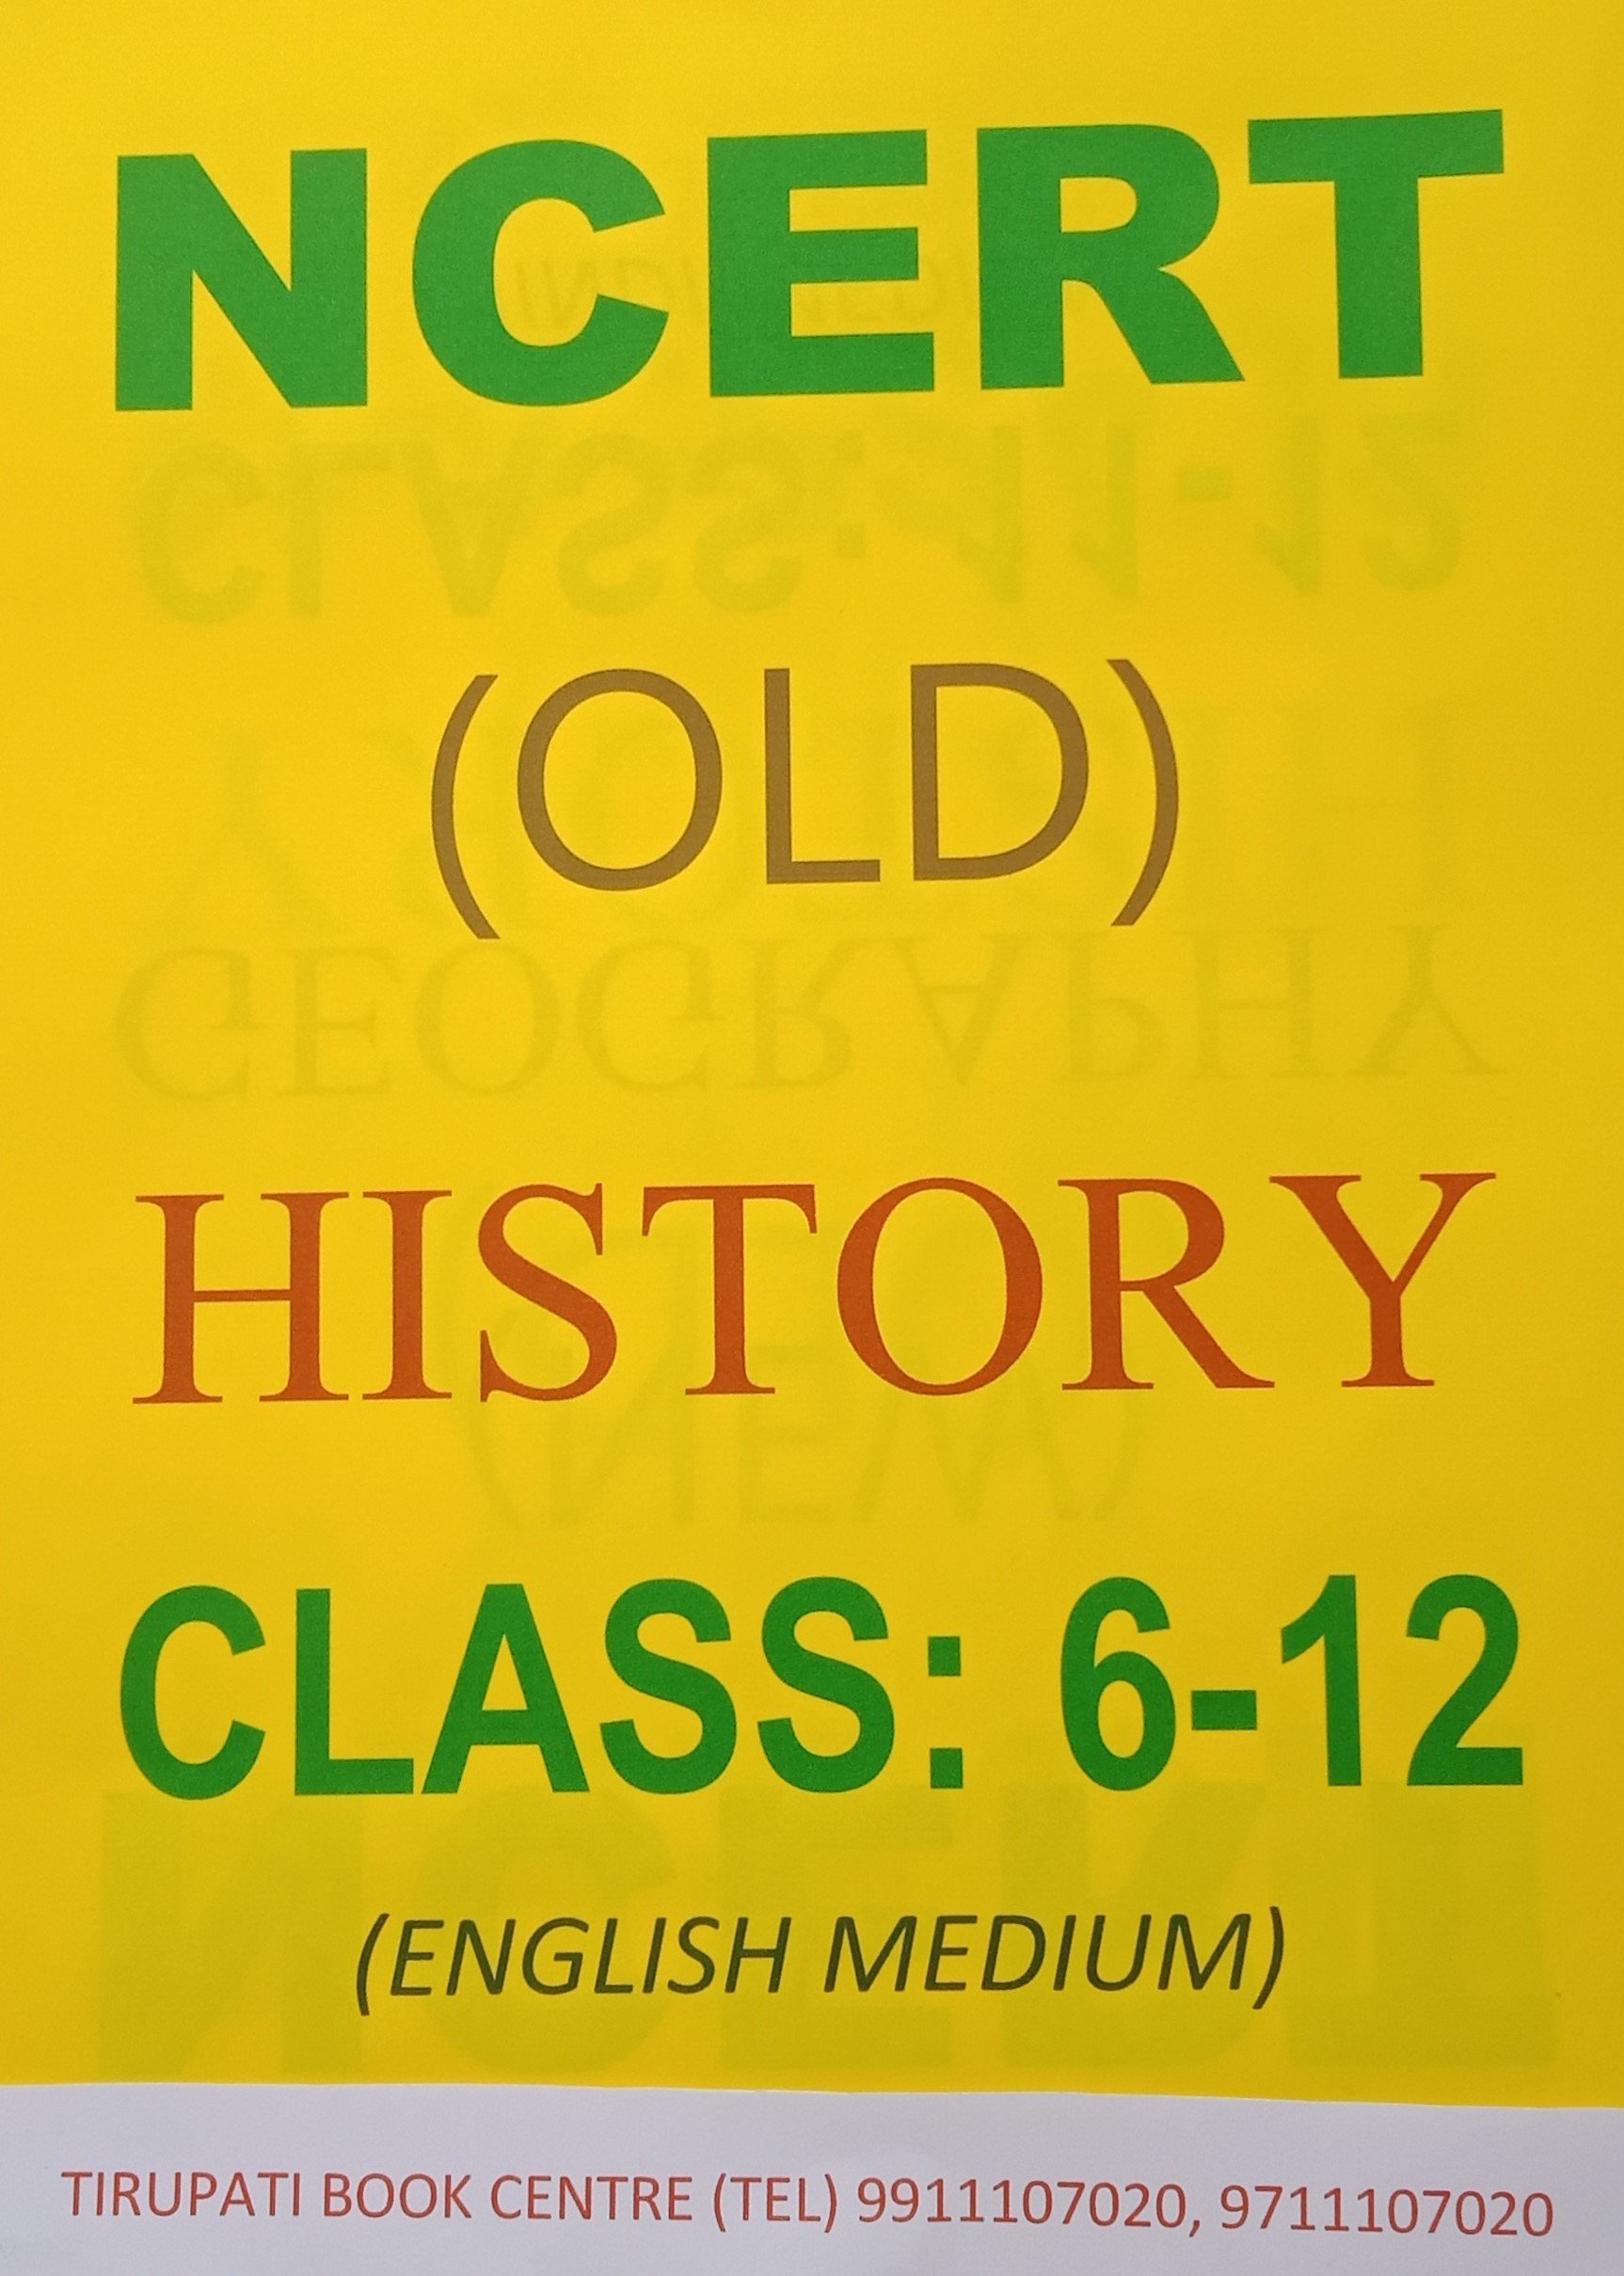 NCERT (OLD) HISTORY - CLASS: 6-12